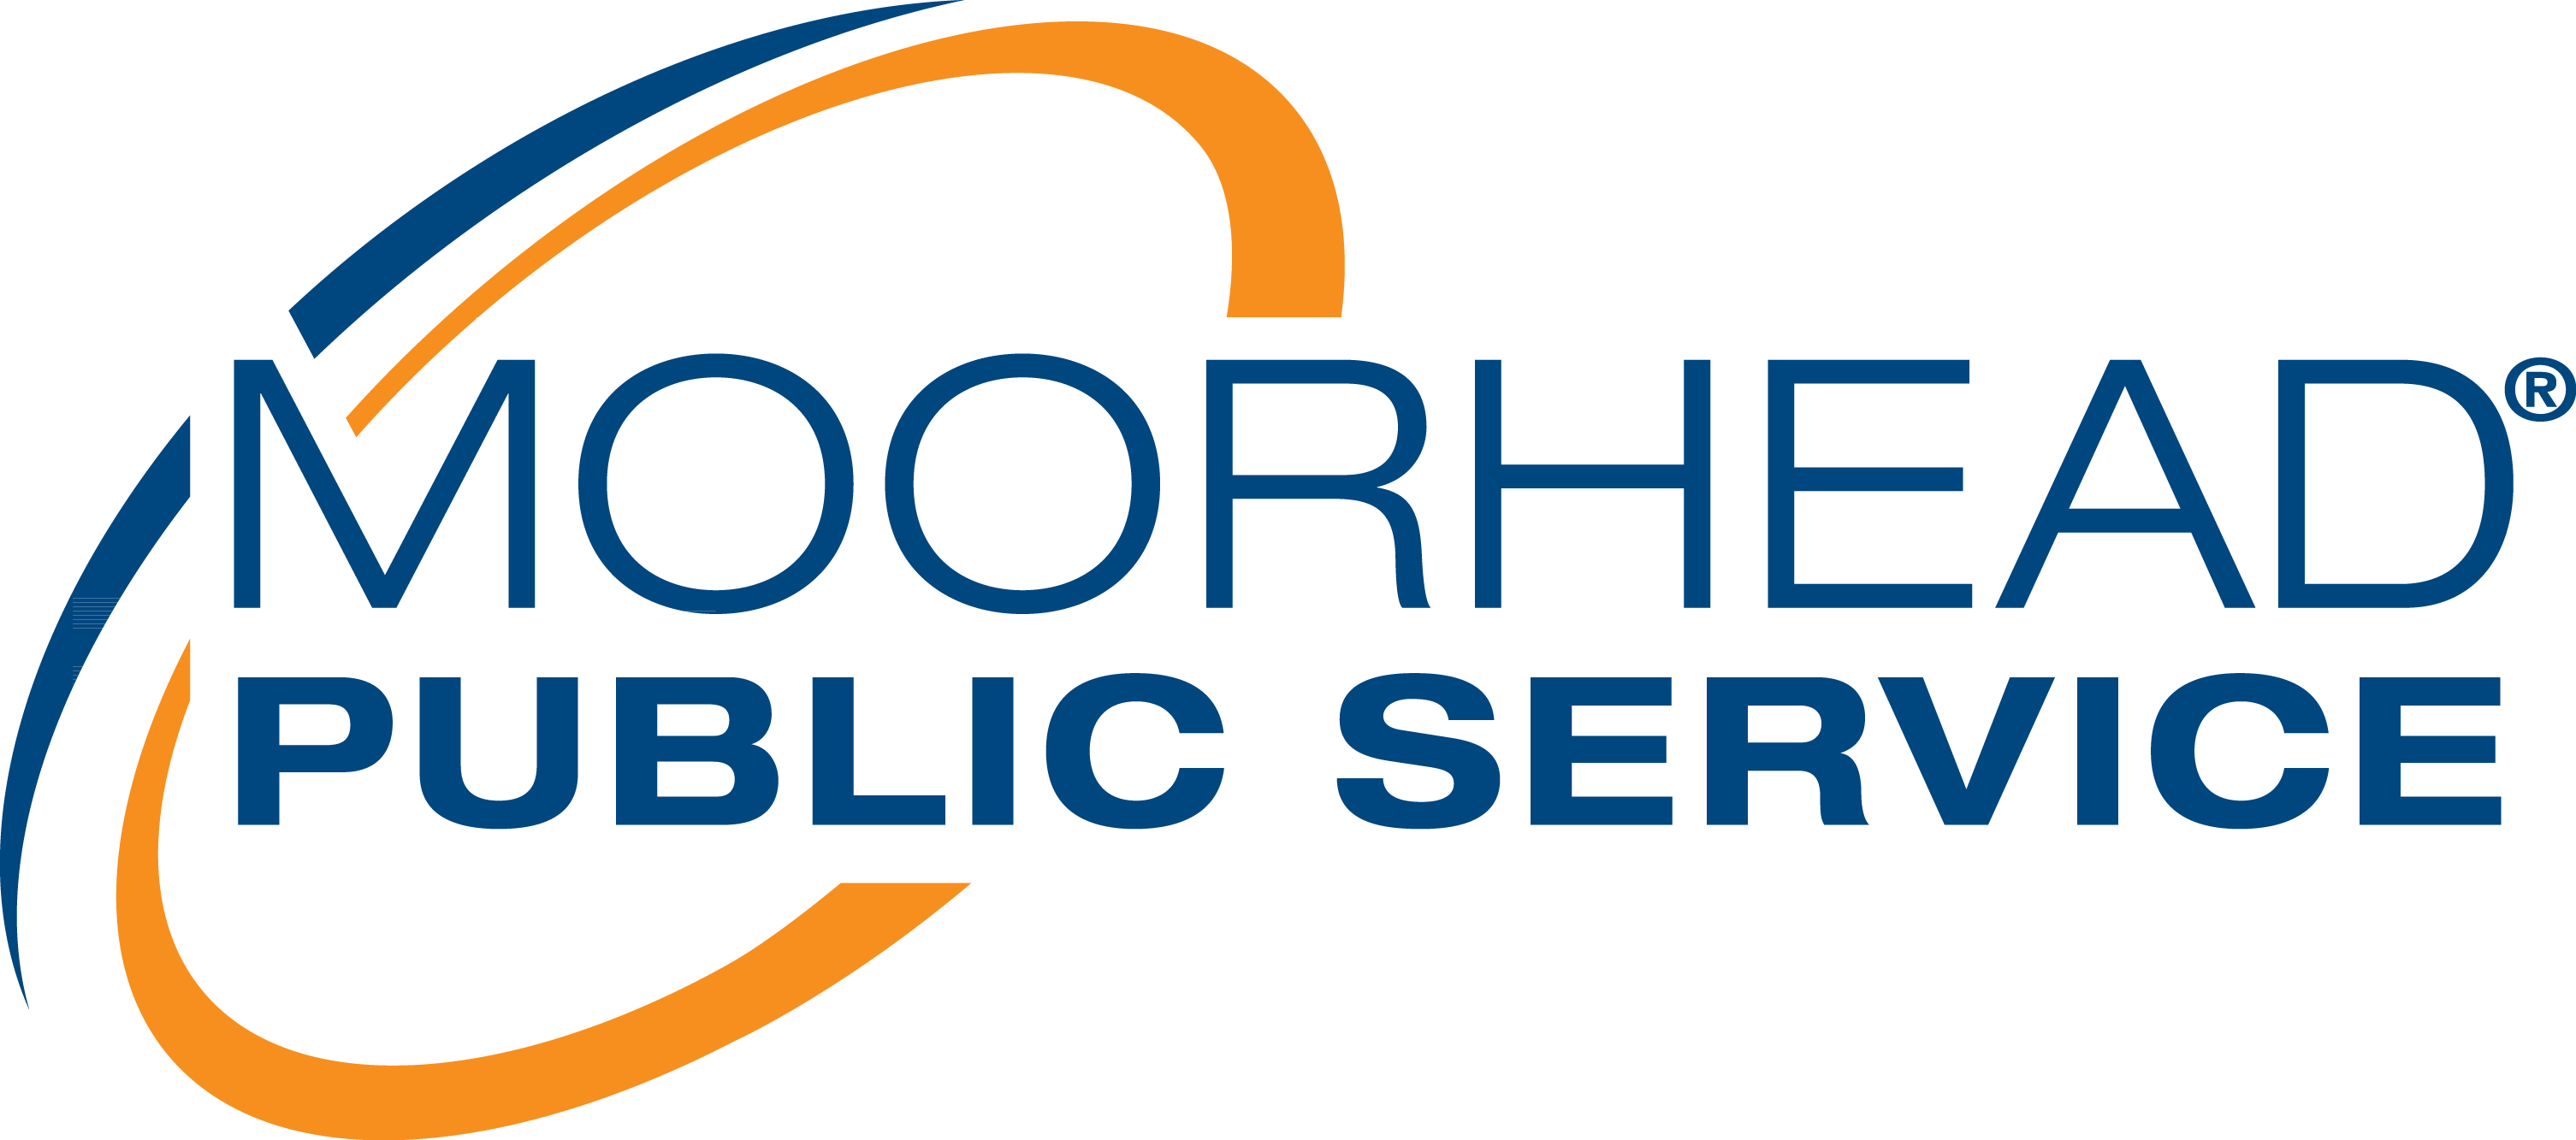 Moorhead Public Service receives national recognition